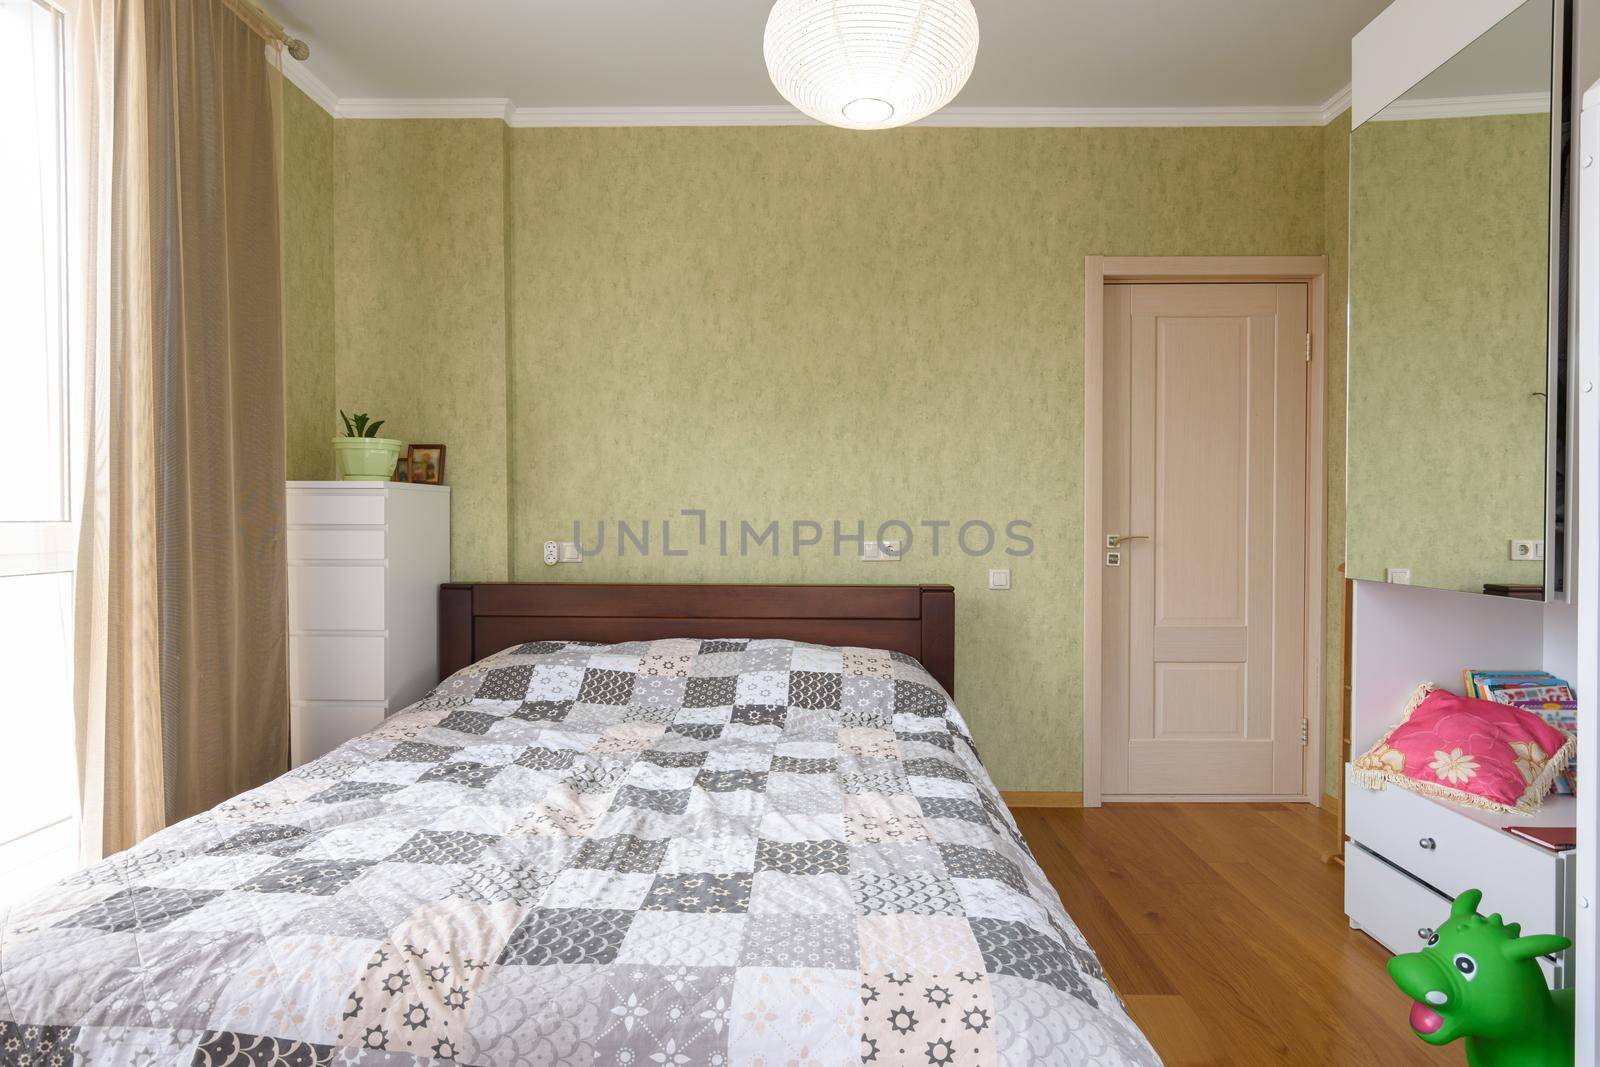 Bedroom interior with a large double bed and a wardrobe with a mirrored door